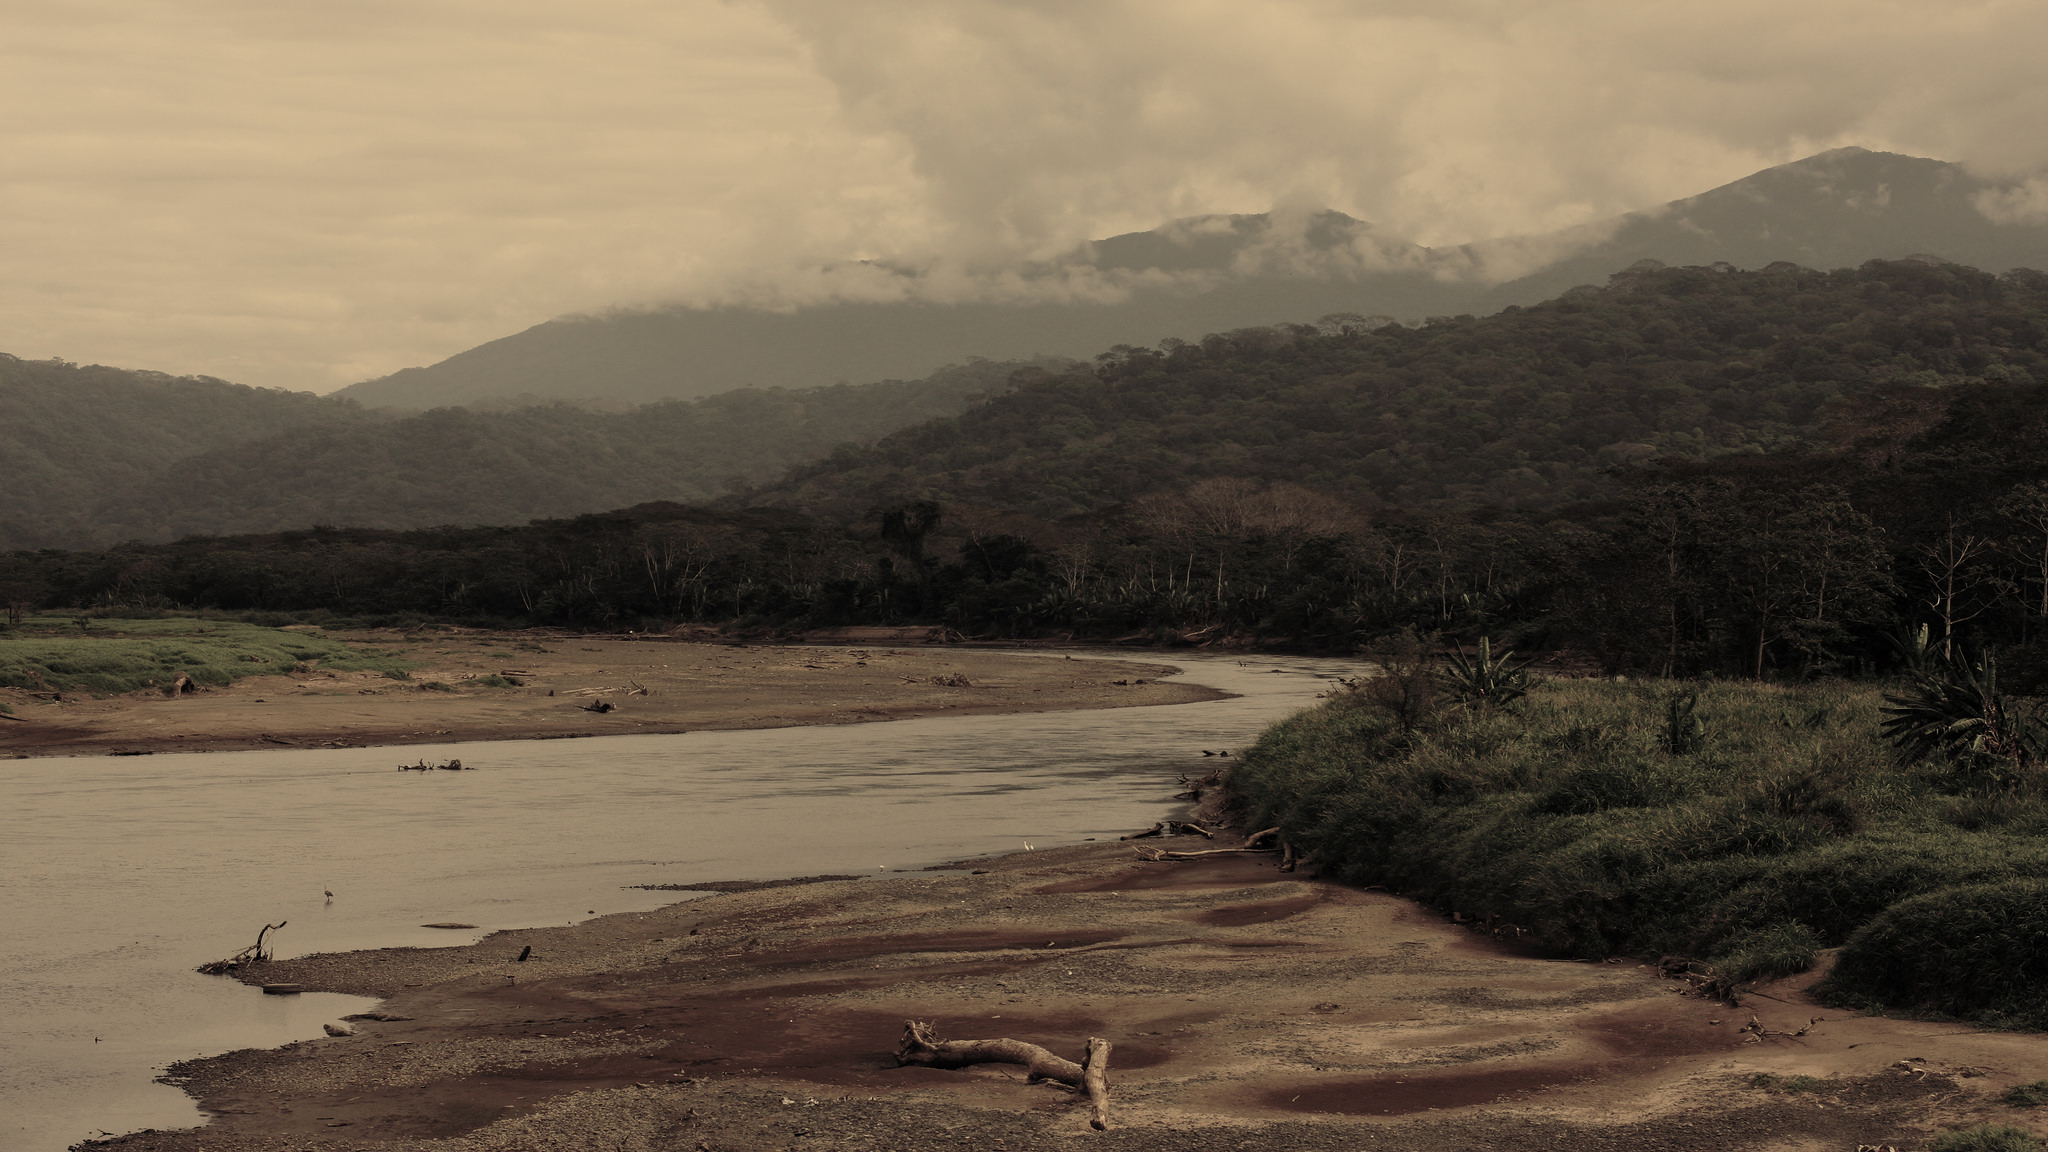 Forest, Water, and Struggle: Environmental Movements in Costa Rica